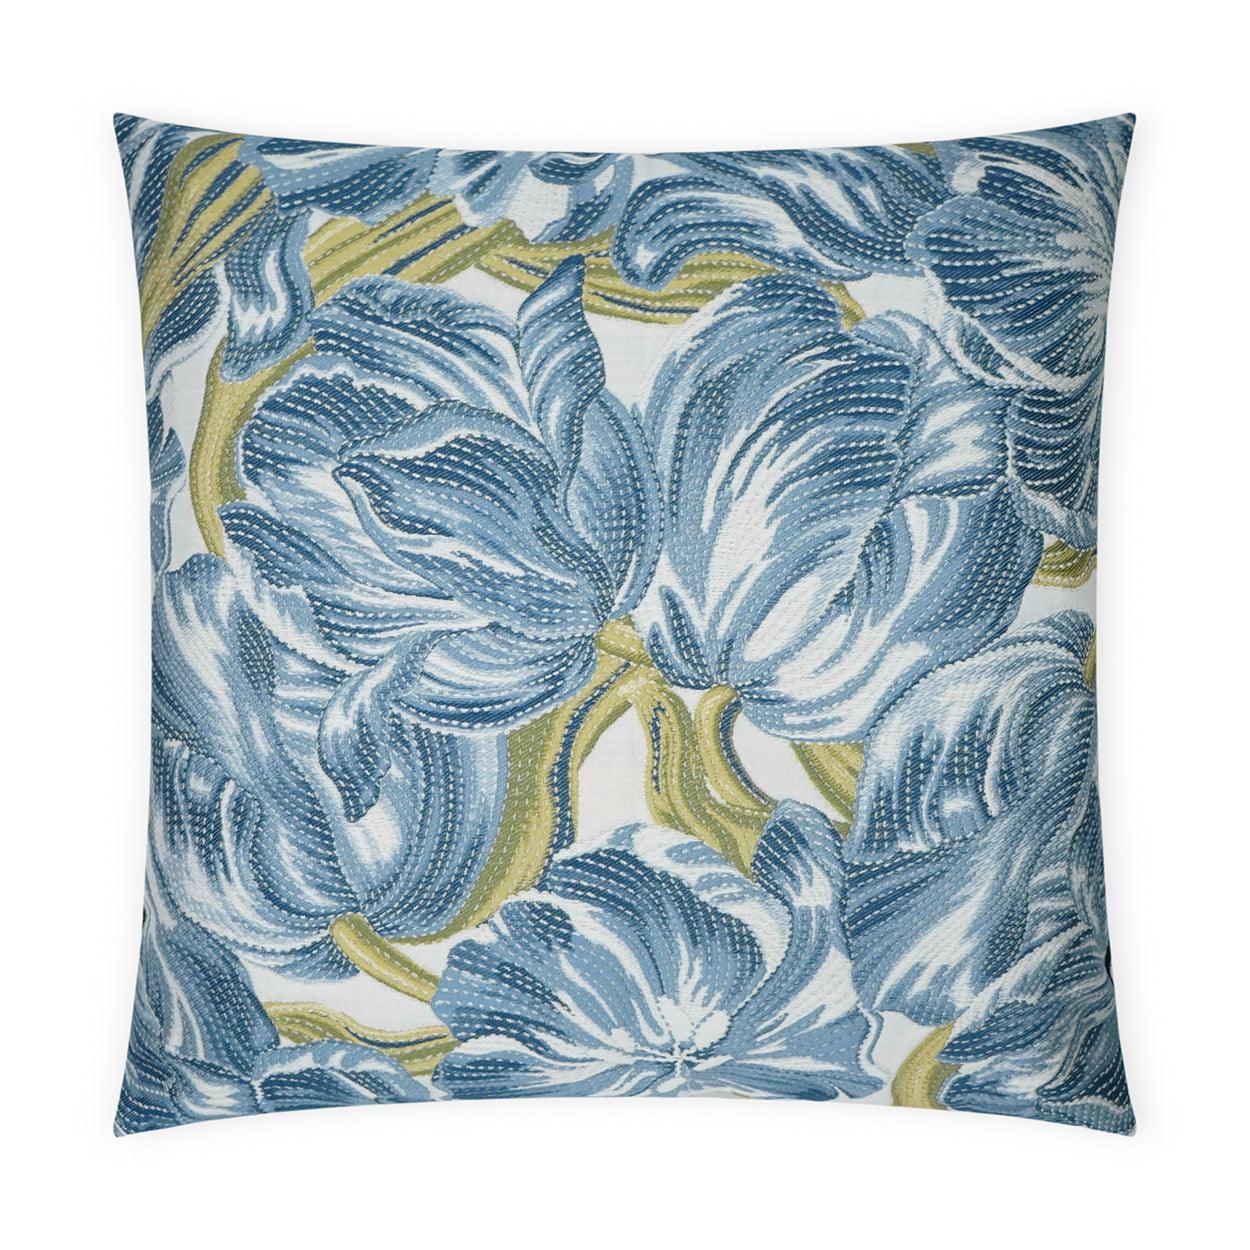 Belle Ame Indigo Floral Blue Large Throw Pillow With Insert - Uptown Sebastian